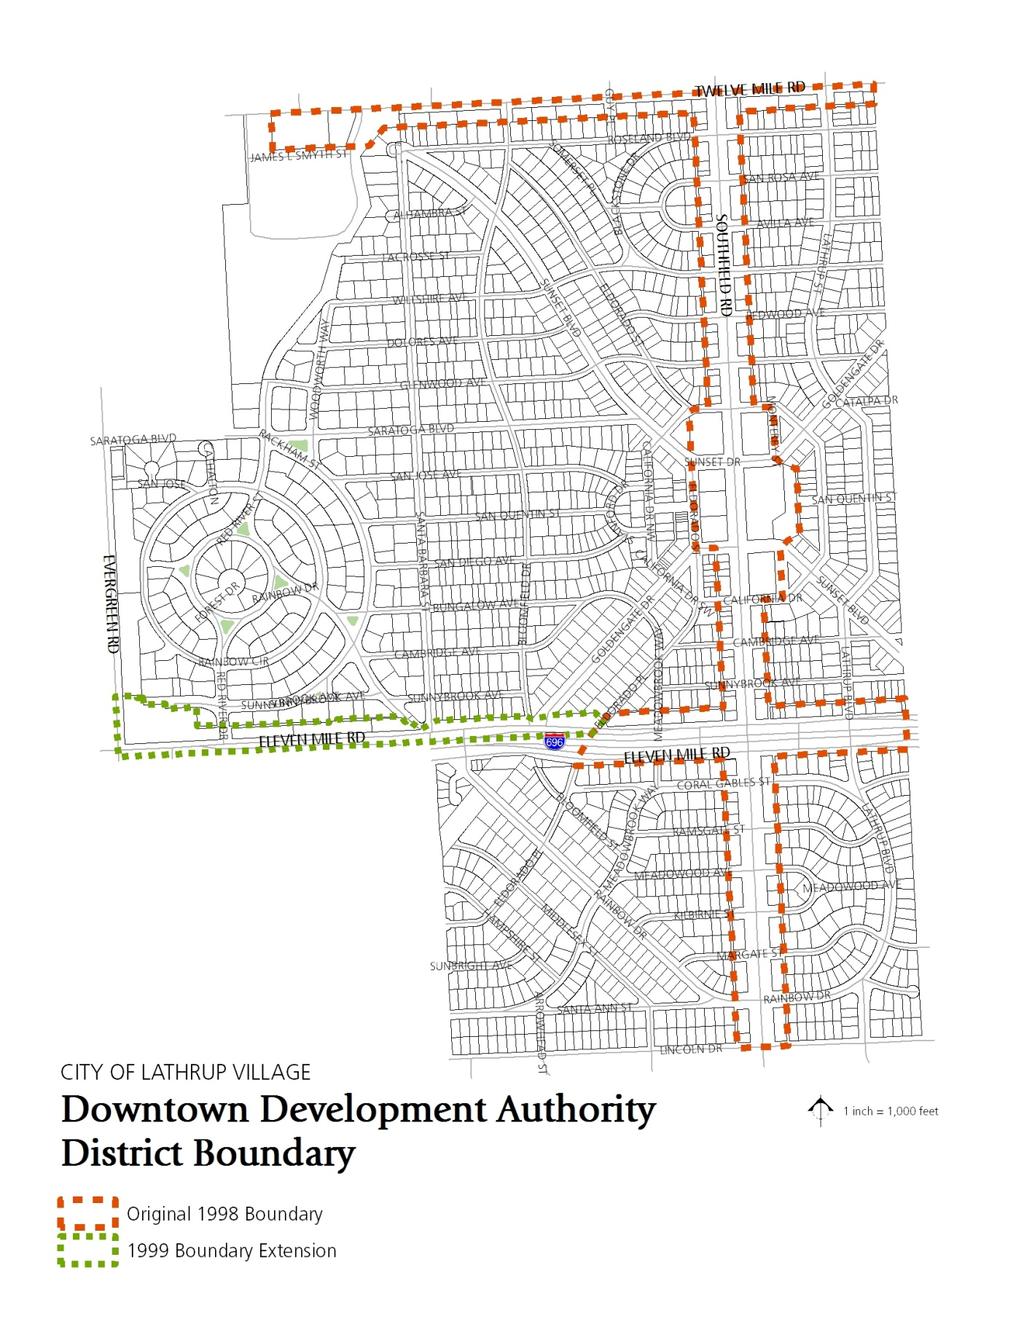 GENERAL DEVELOPMENT PLAN FOR THE LATHRUP VILLAGE DDA The need for establishing the Lathrup Village Development District (referred to as "Development Area") is founded on the basis that the future